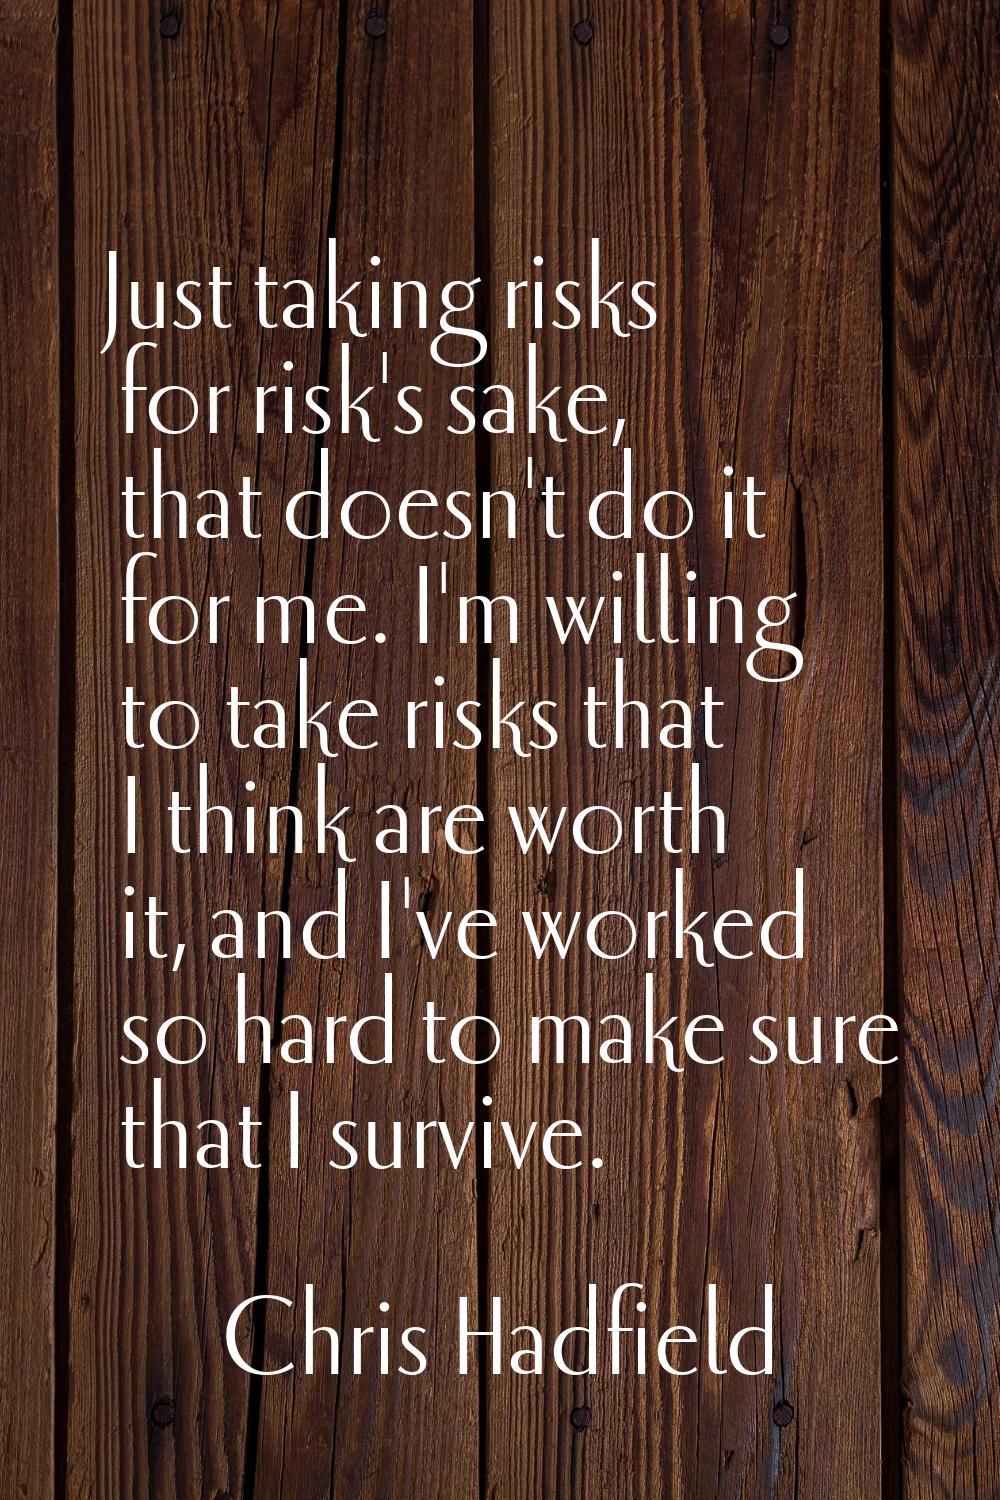 Just taking risks for risk's sake, that doesn't do it for me. I'm willing to take risks that I thin